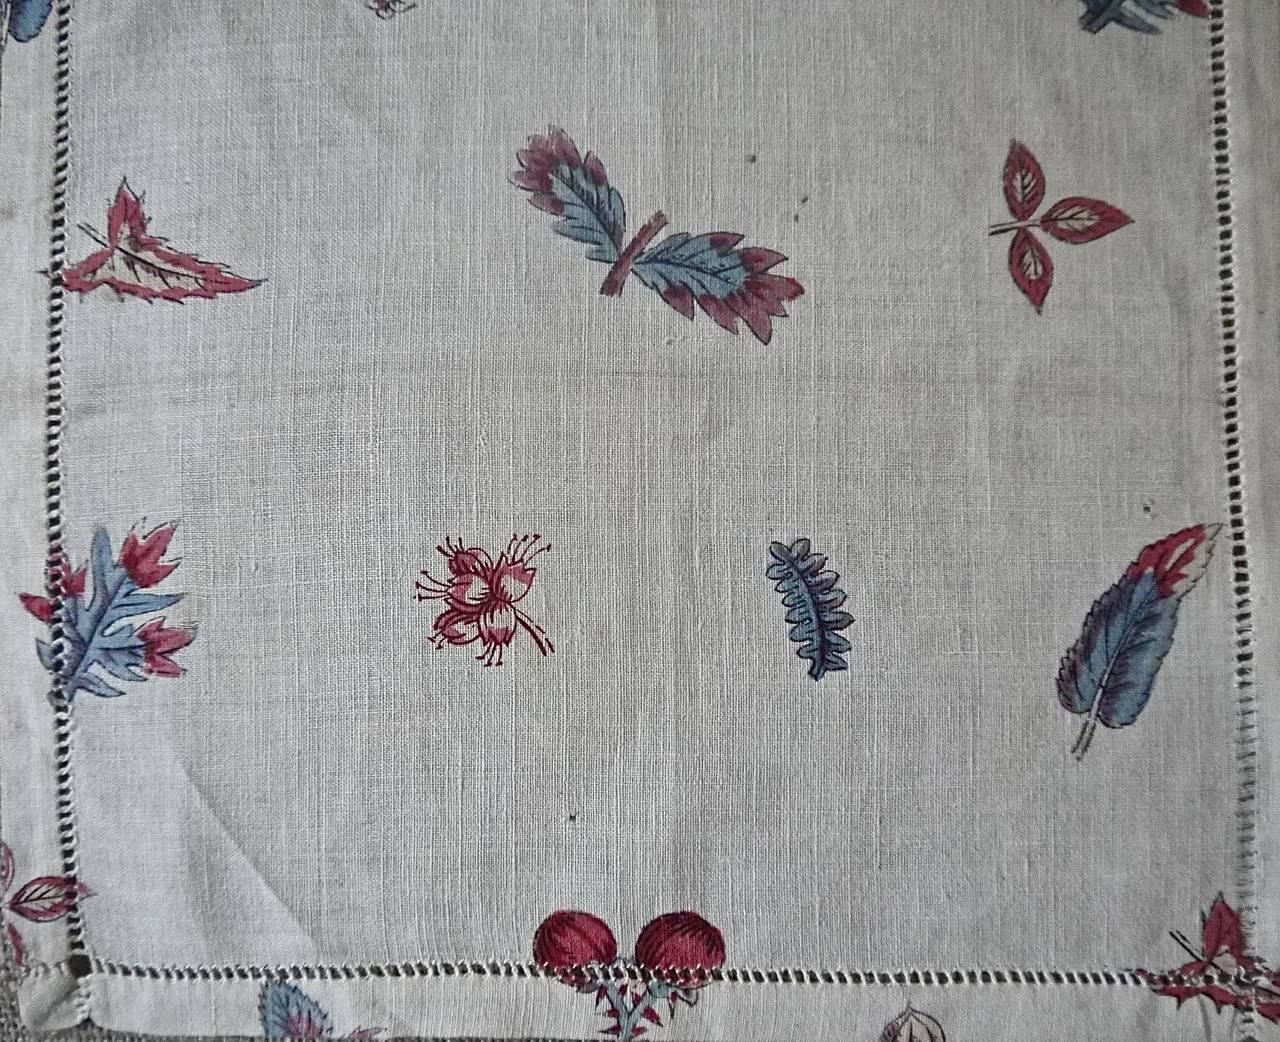 French Provincial 18th Century Antique French Block Printed Mouchoir Cotton Handkerchief